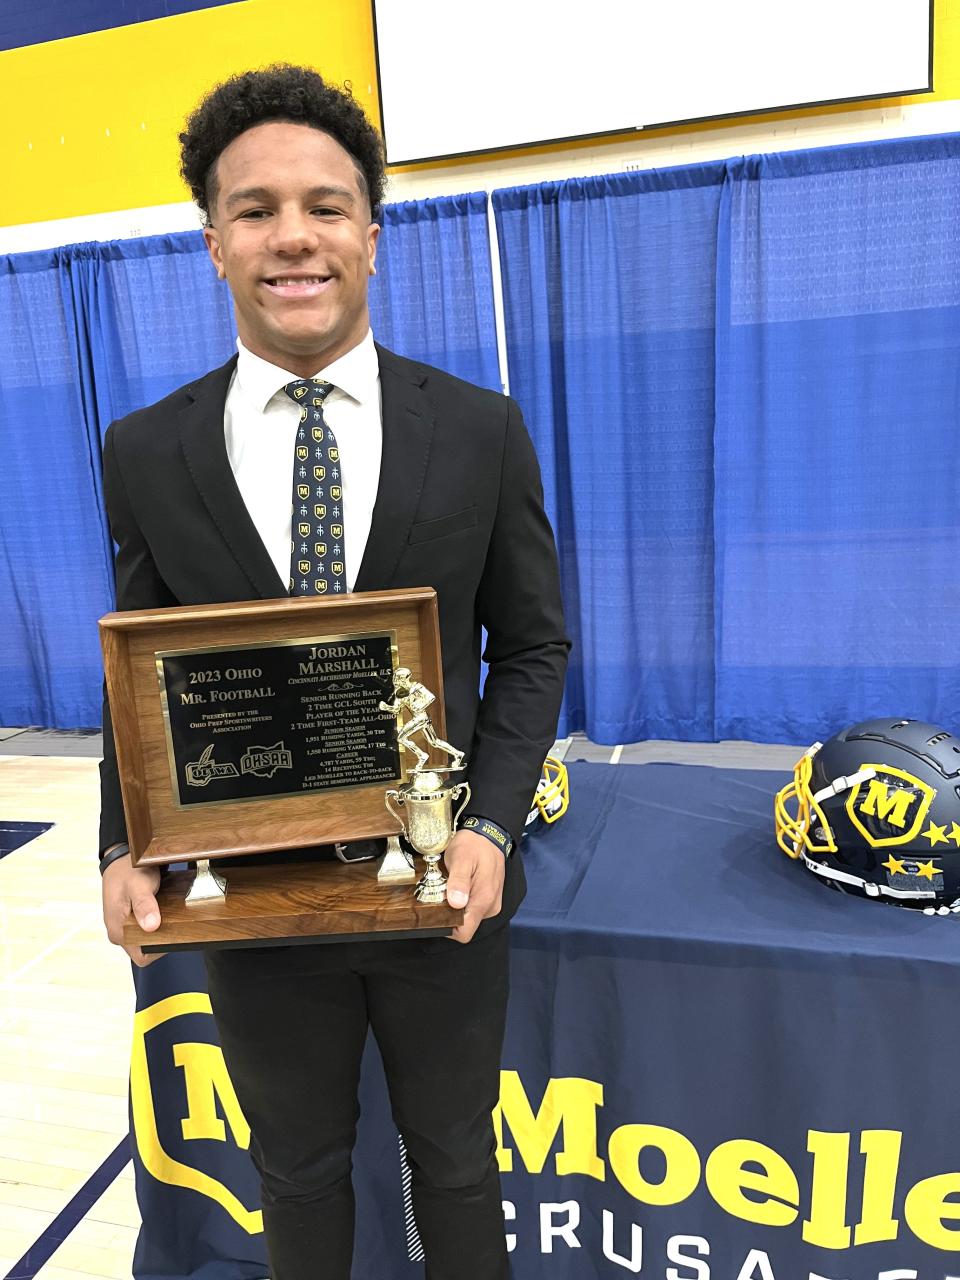 Senior Jordan Marshall with the Mr. Football trophy he was presented at Moeller on Wednesday morning.